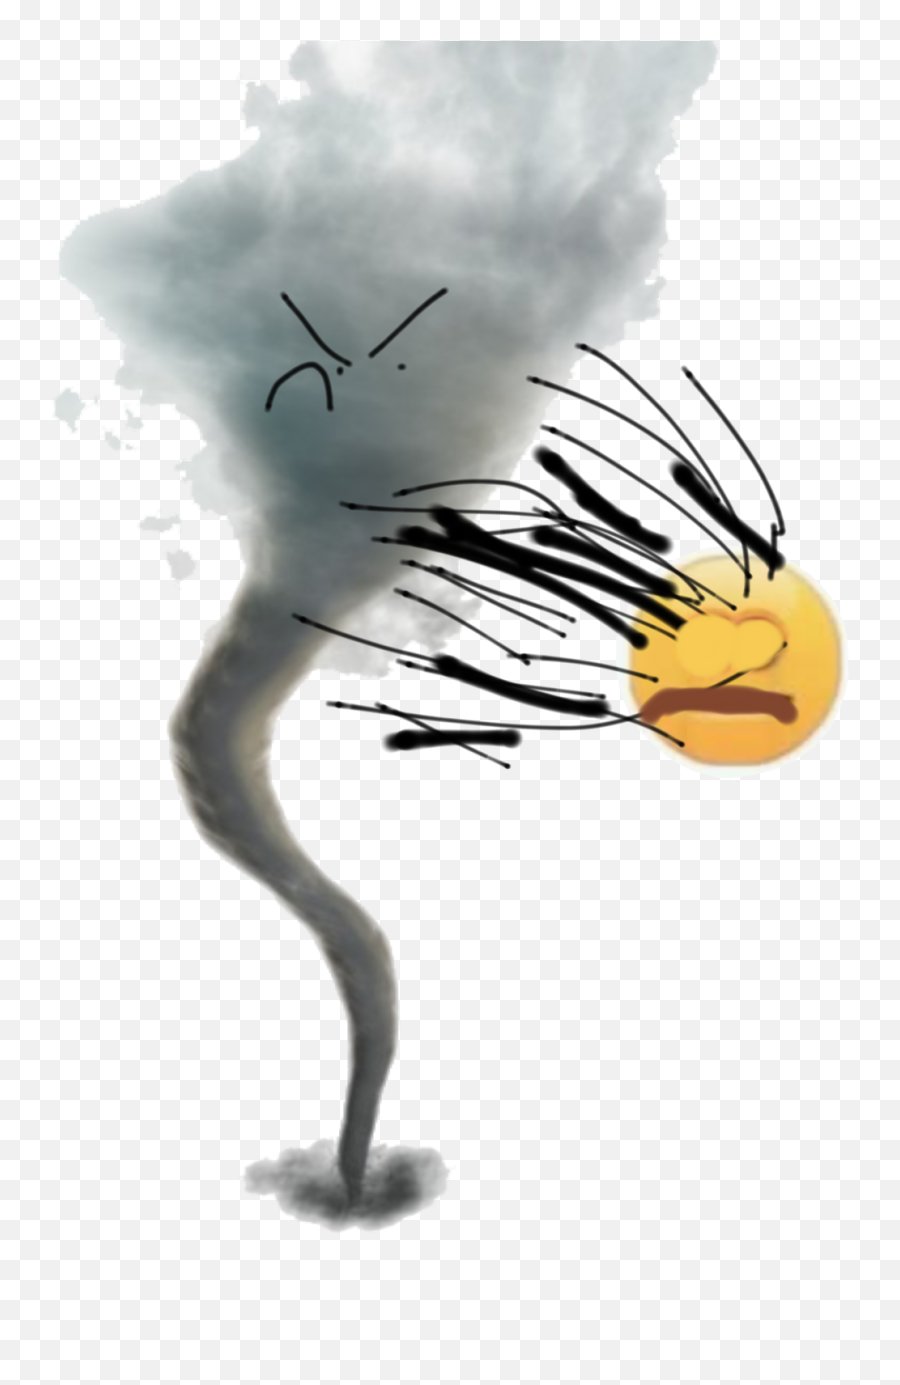 Beating Up The Sticker By Storm The Torndo - Tornado Air Element Png Emoji,Storm Emoji